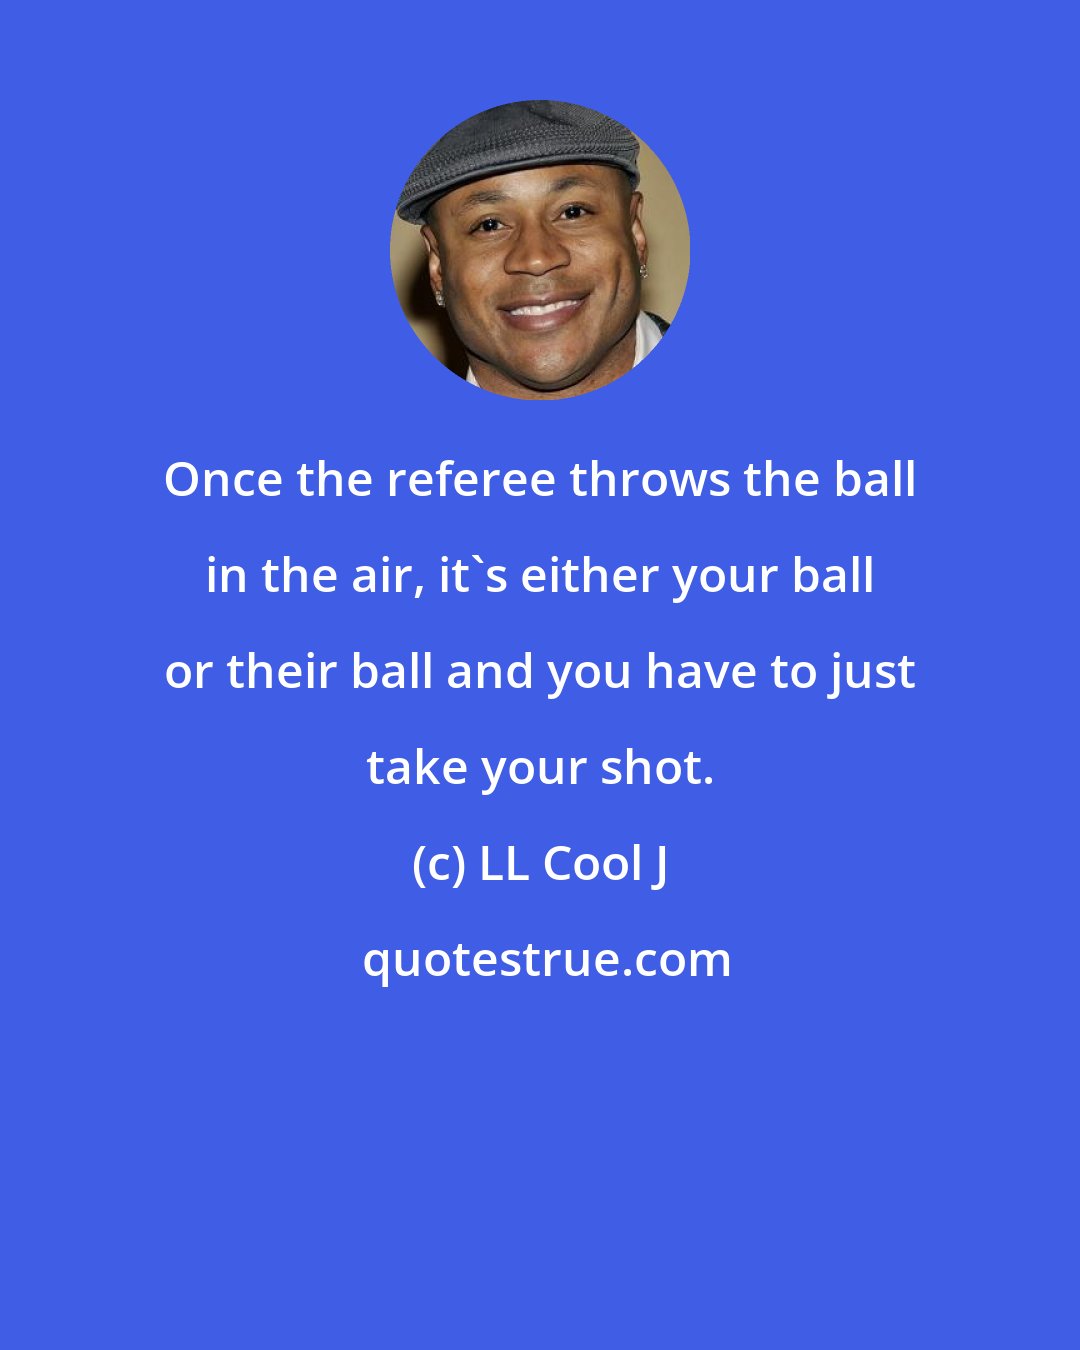 LL Cool J: Once the referee throws the ball in the air, it's either your ball or their ball and you have to just take your shot.